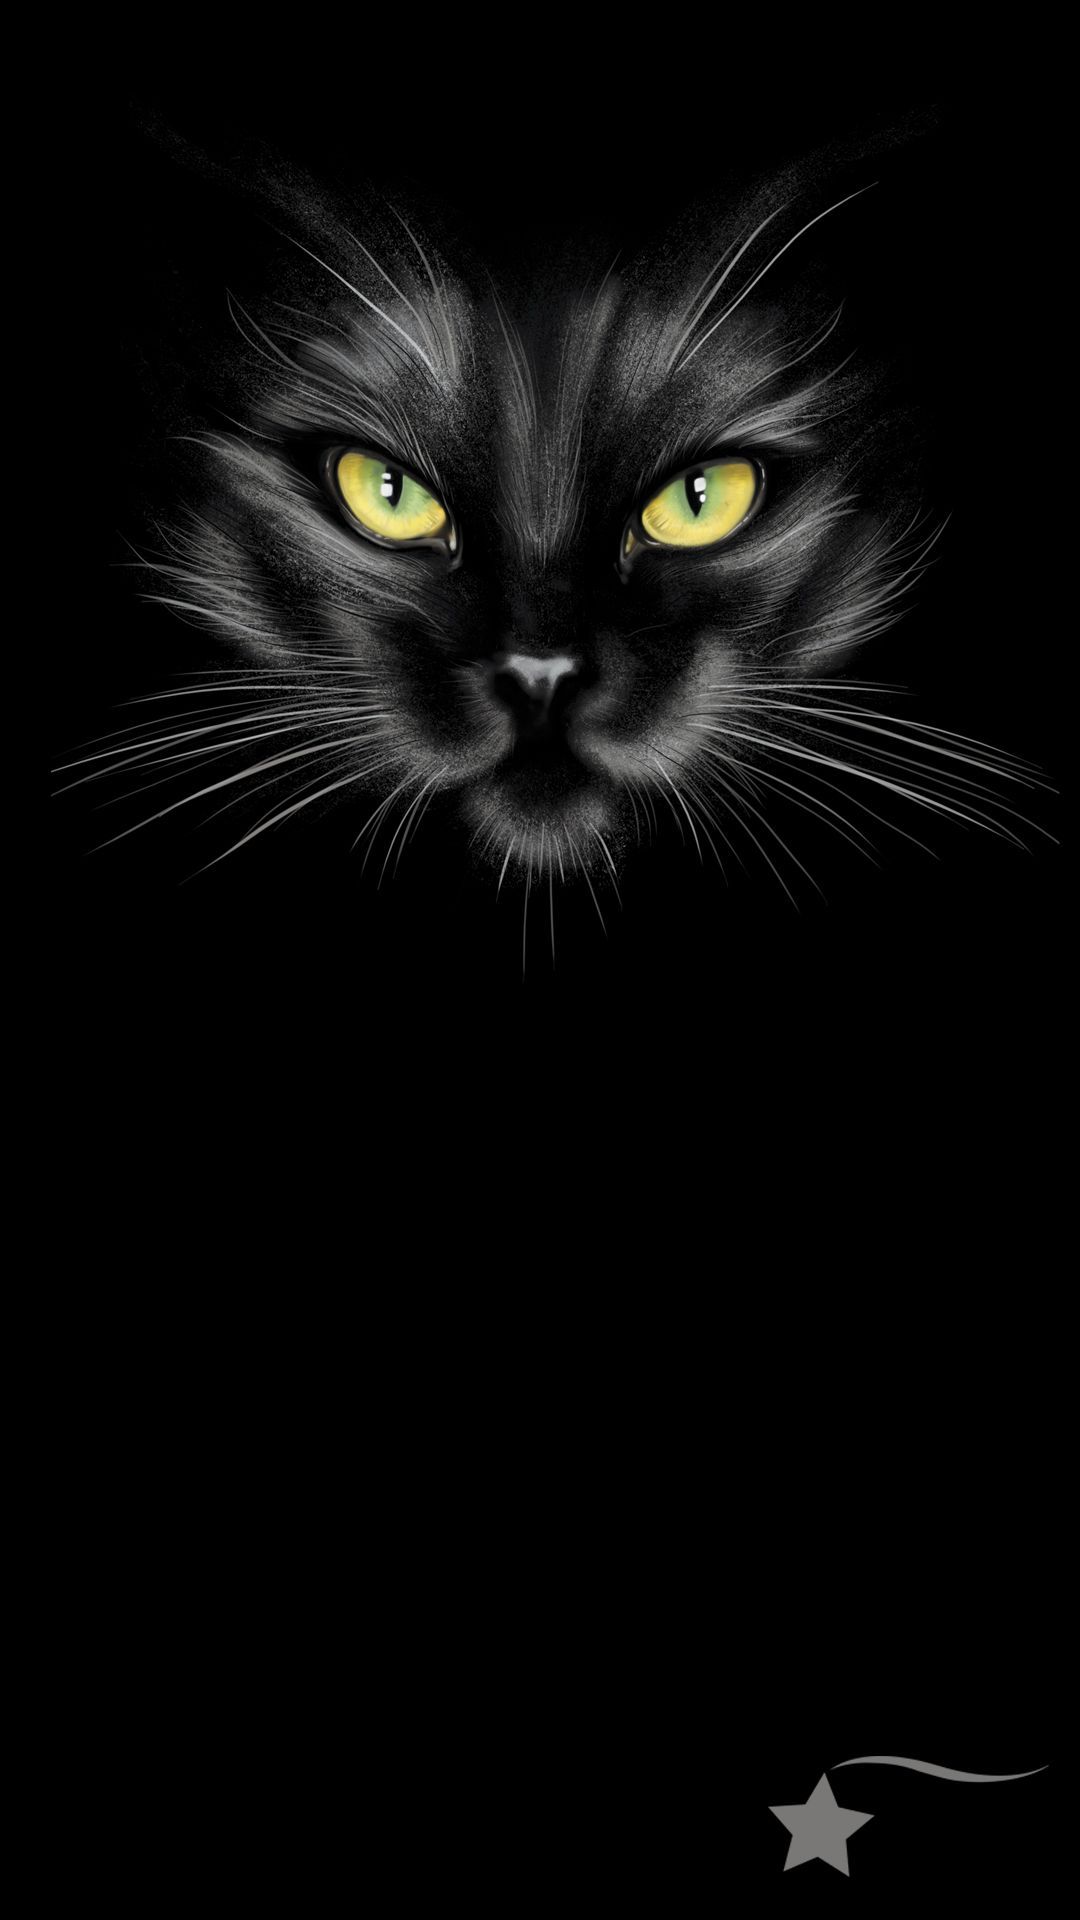 Black Cat For Mobile Wallpapers - Wallpaper Cave